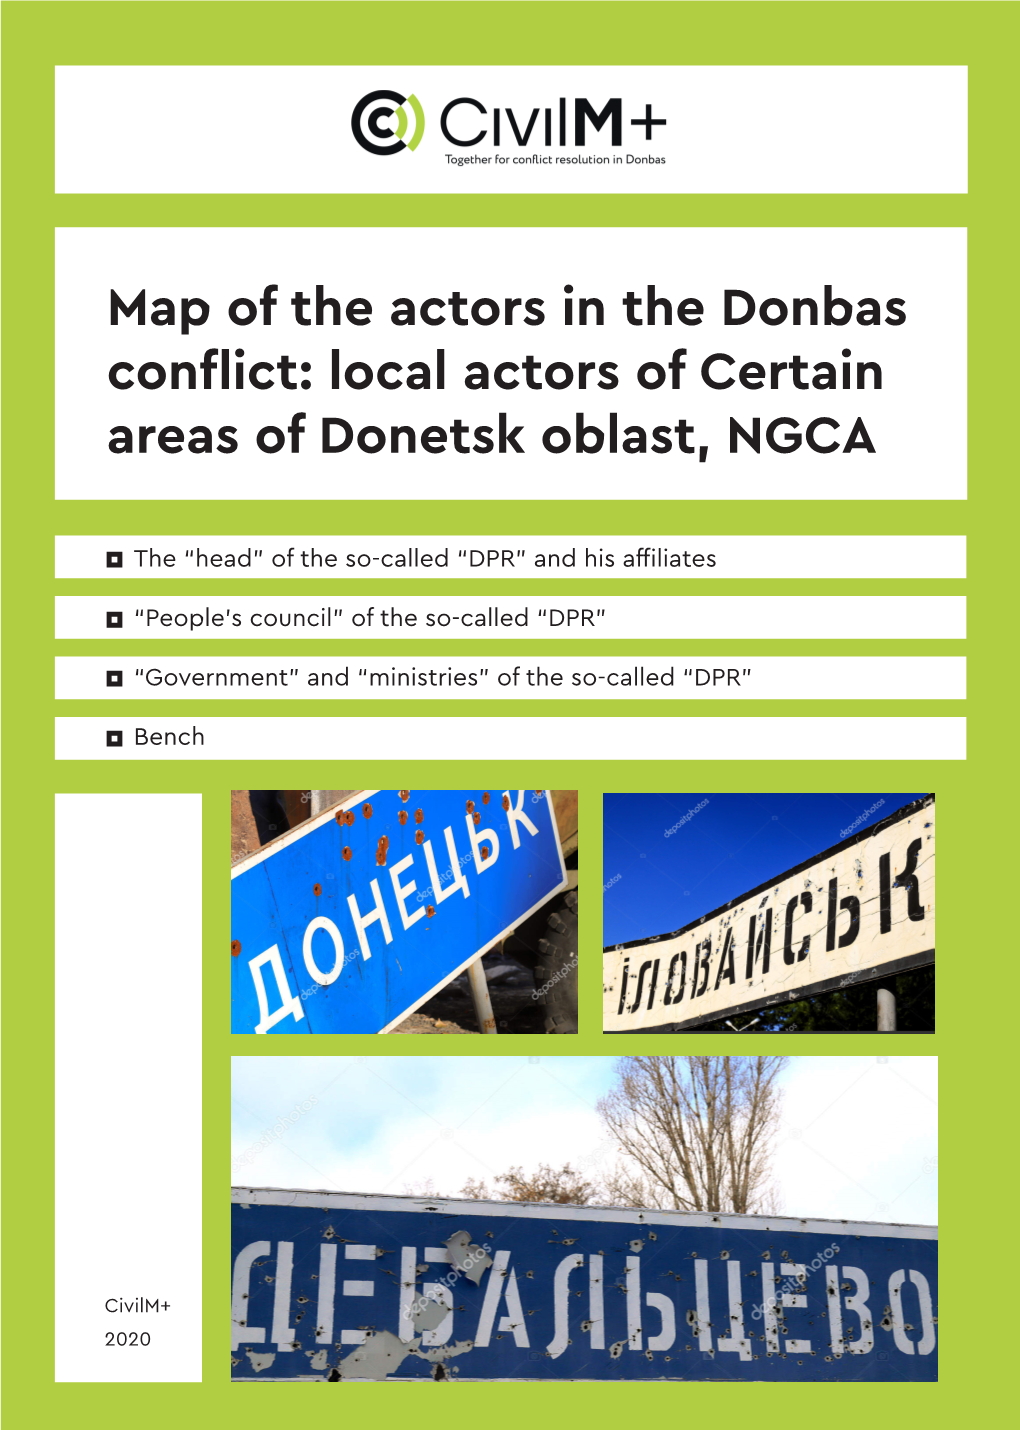 Map of the Actors in the Donbas Conflict: Local Actors of Certain Areas of Donetsk Oblast, NGCA